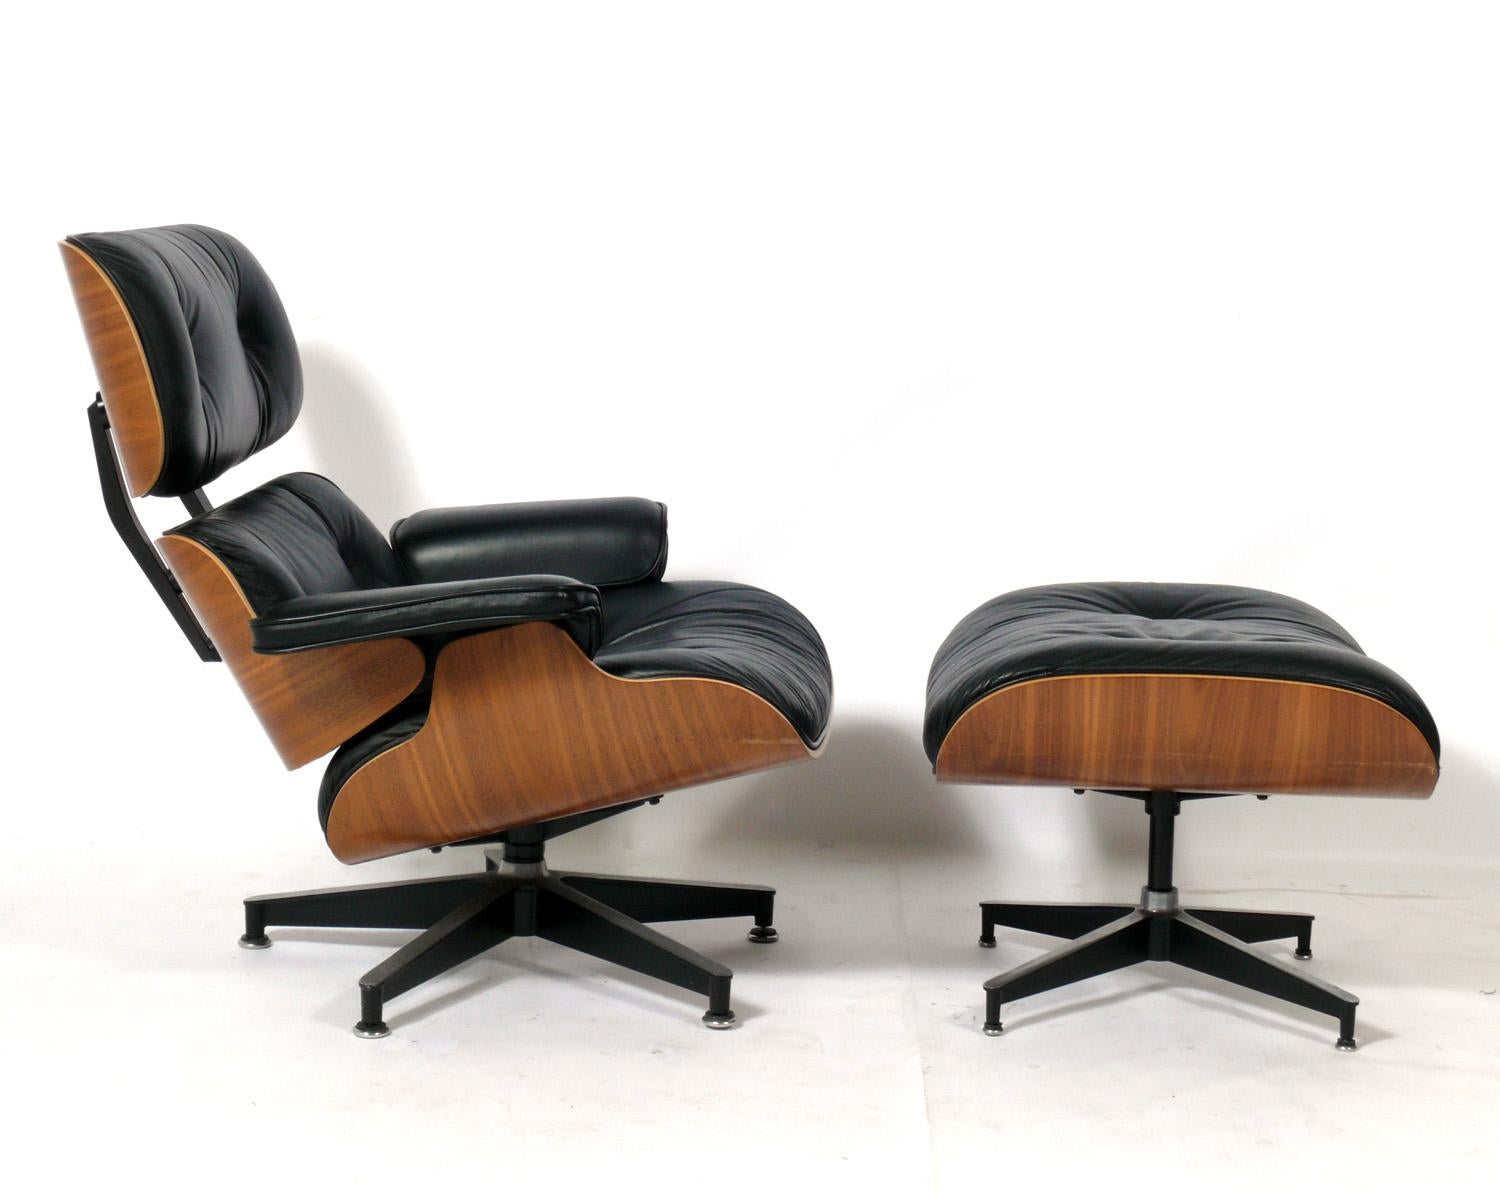 Iconic walnut and black leather lounge chair and ottoman, Model 670 and 671, designed by Charles and Ray Eames for Herman Miller, American, circa 1990s. Signed with Herman Miller tag underneath. Perfectly broken in like your favorite baseball glove.